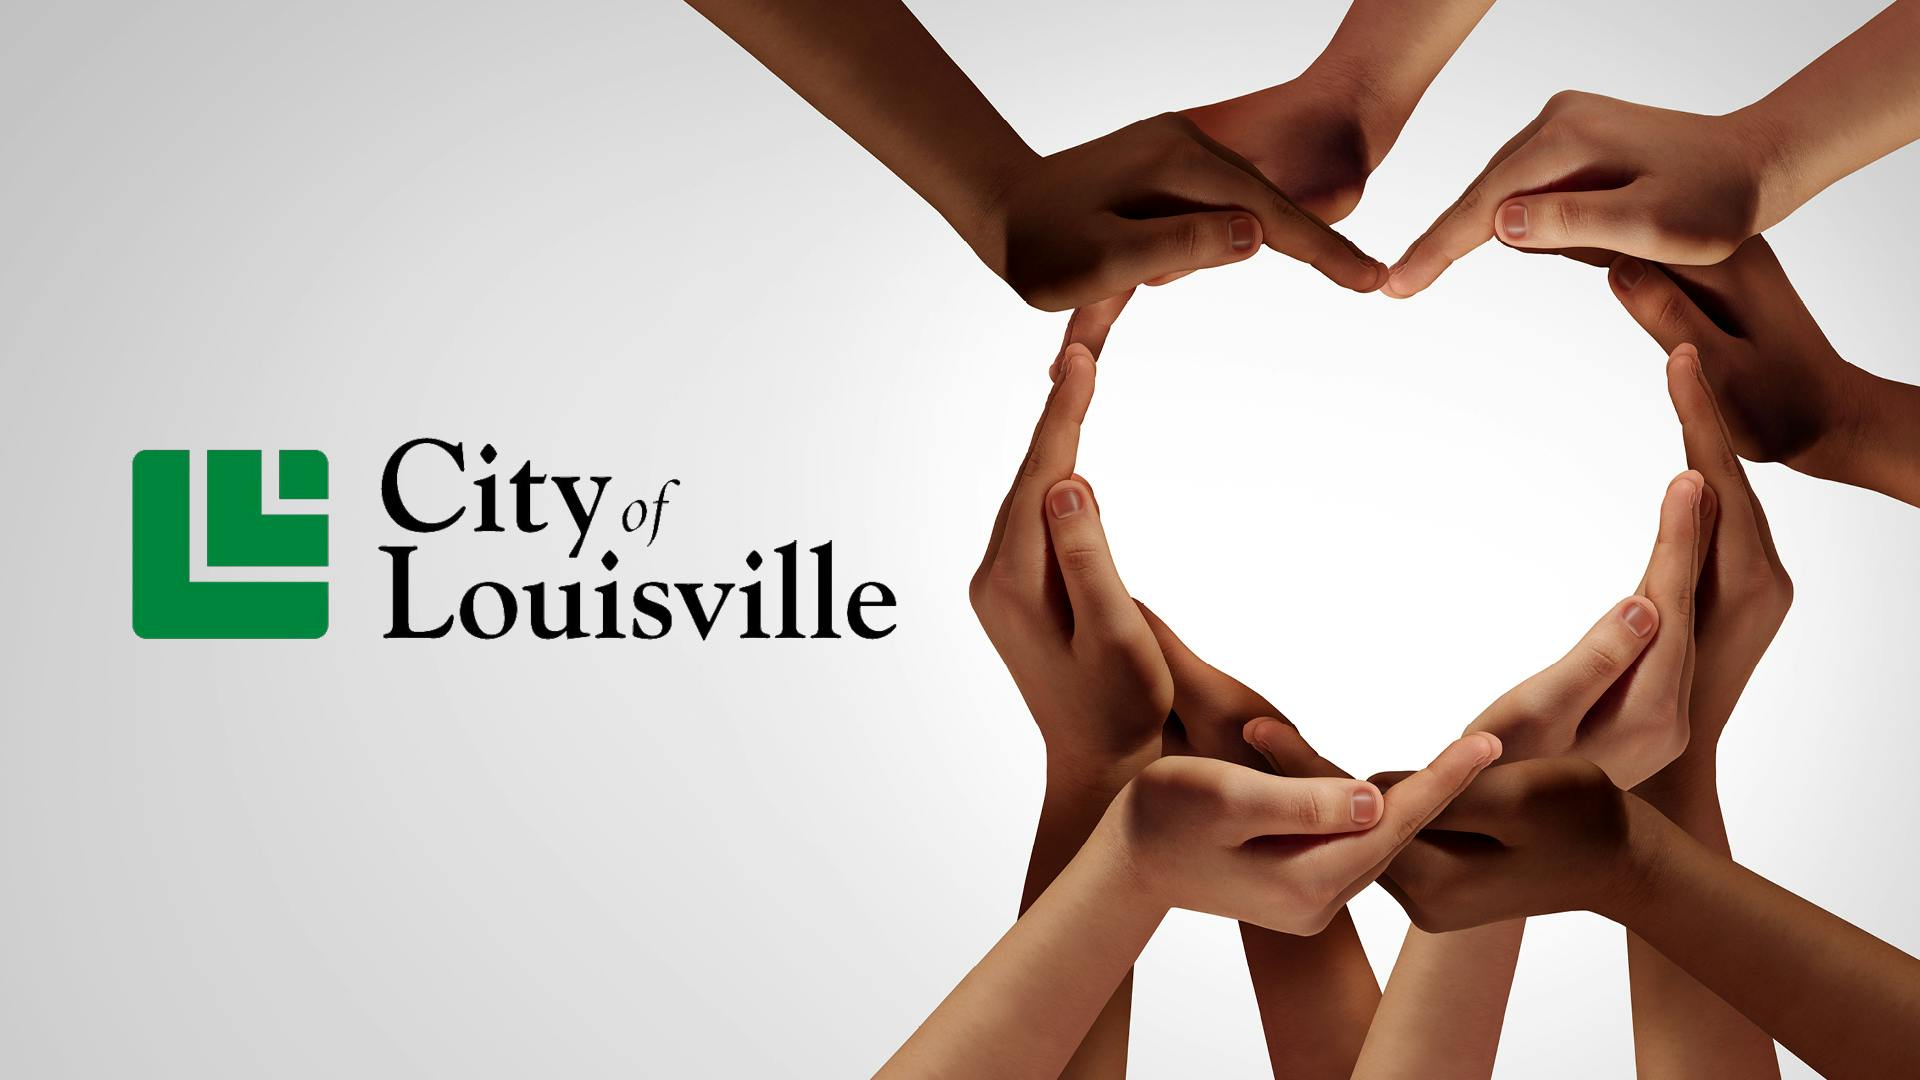 hands in a heart shape with City of Louisville logo